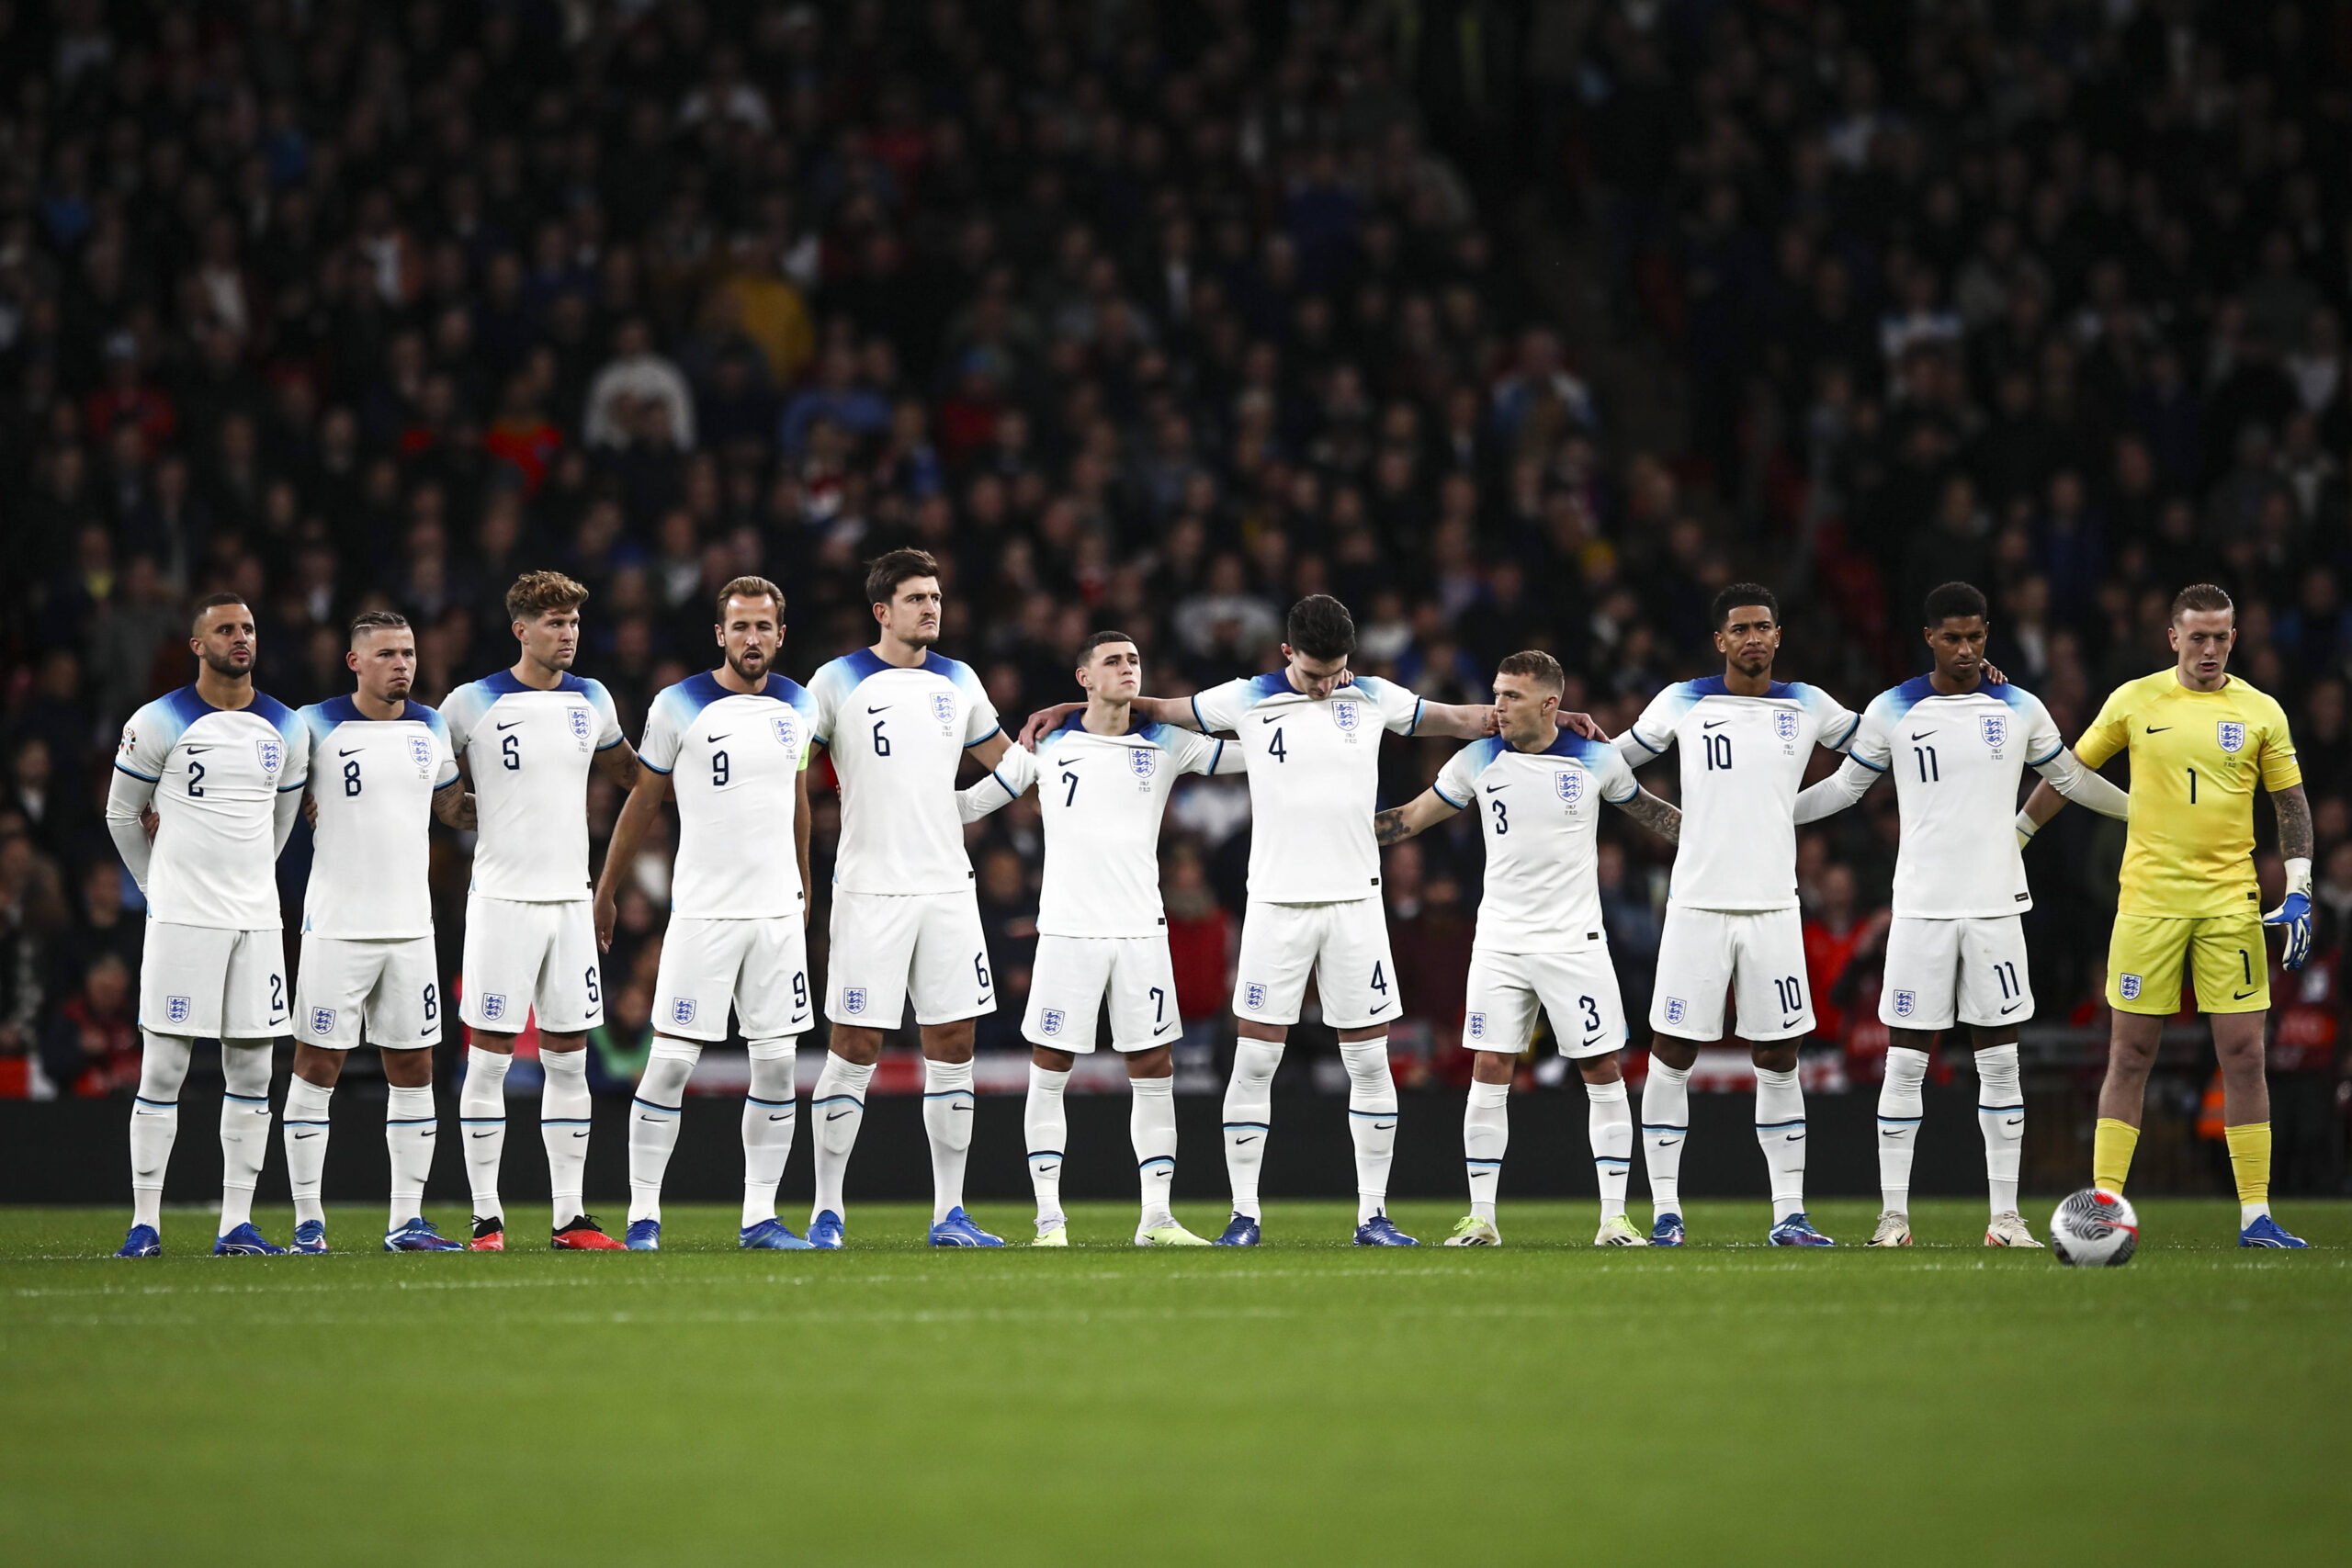 England players lineup before their clash against Italy in the Euro Qualifiers.